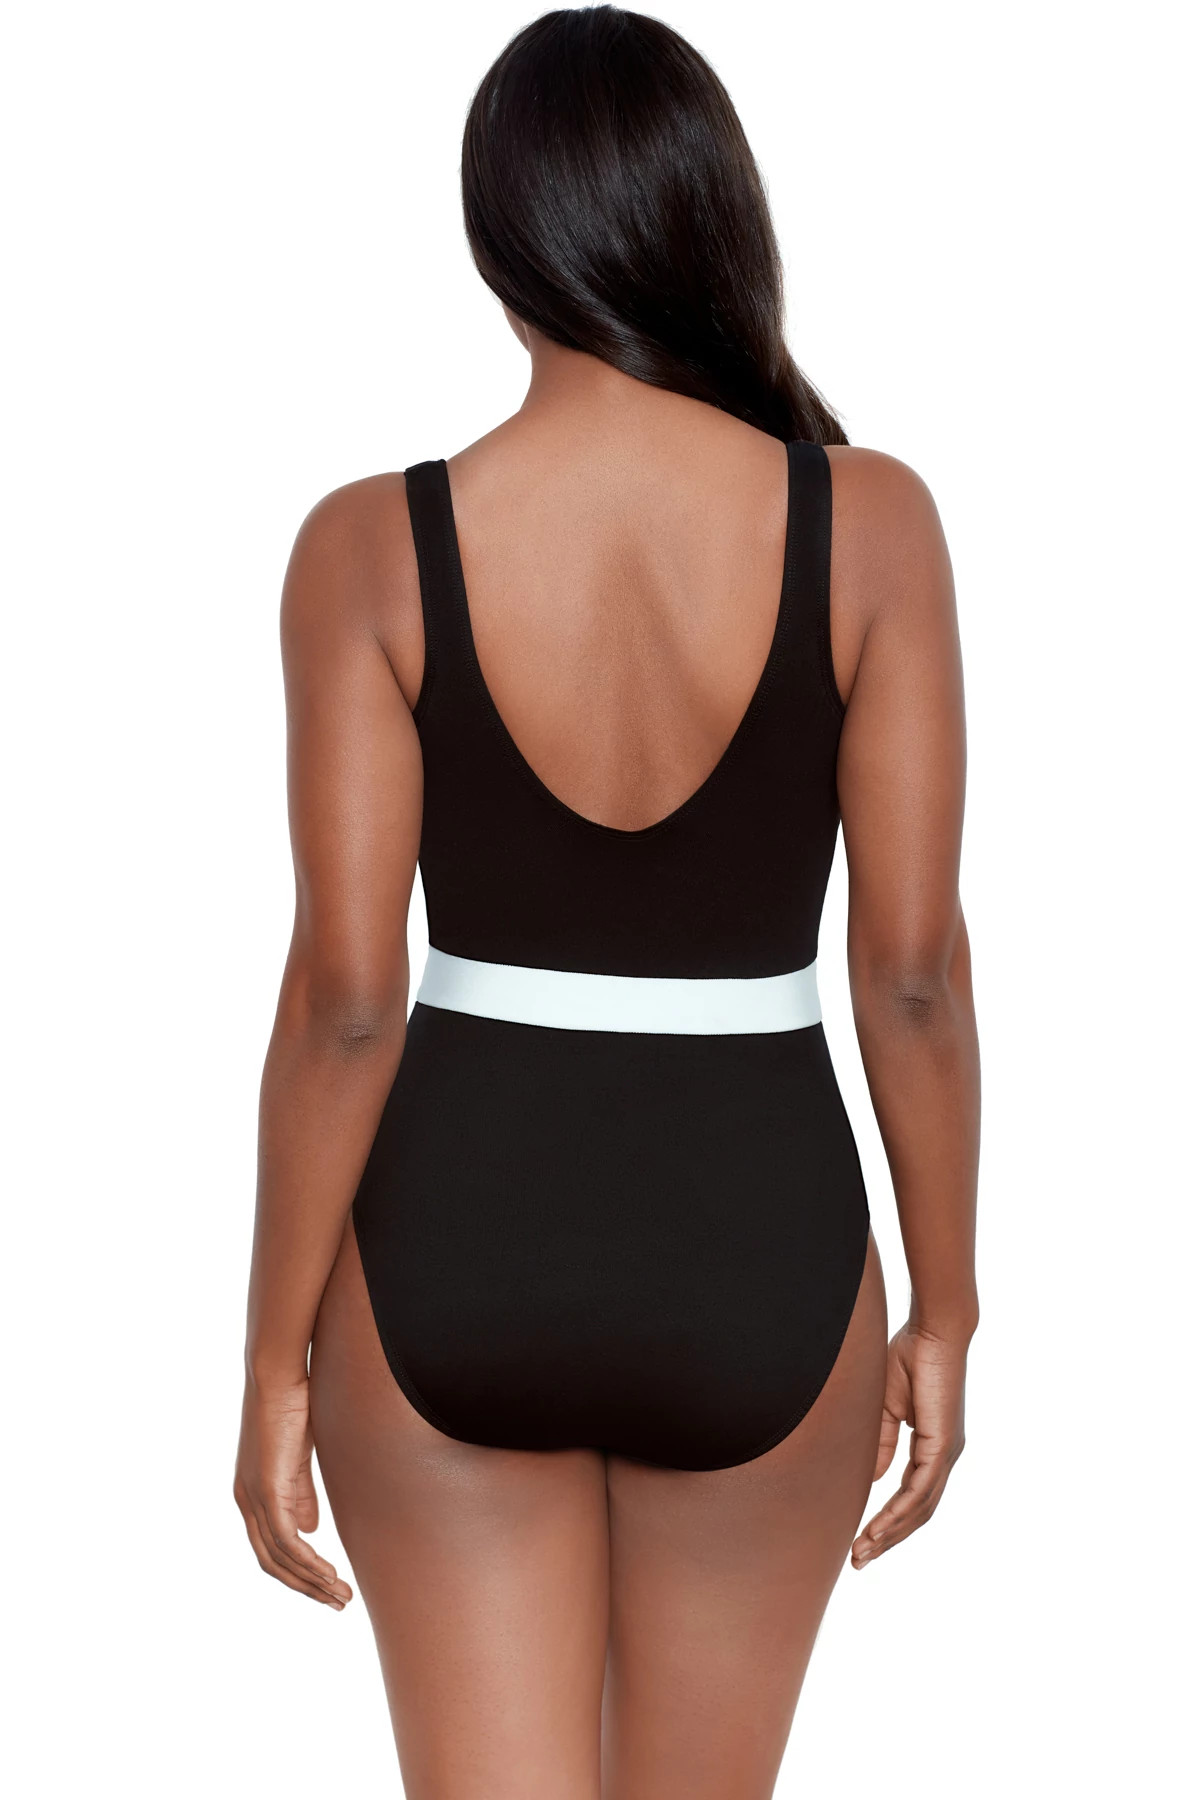 BLACK/WHITE Spectra Somerland One Piece Swimsuit image number 2